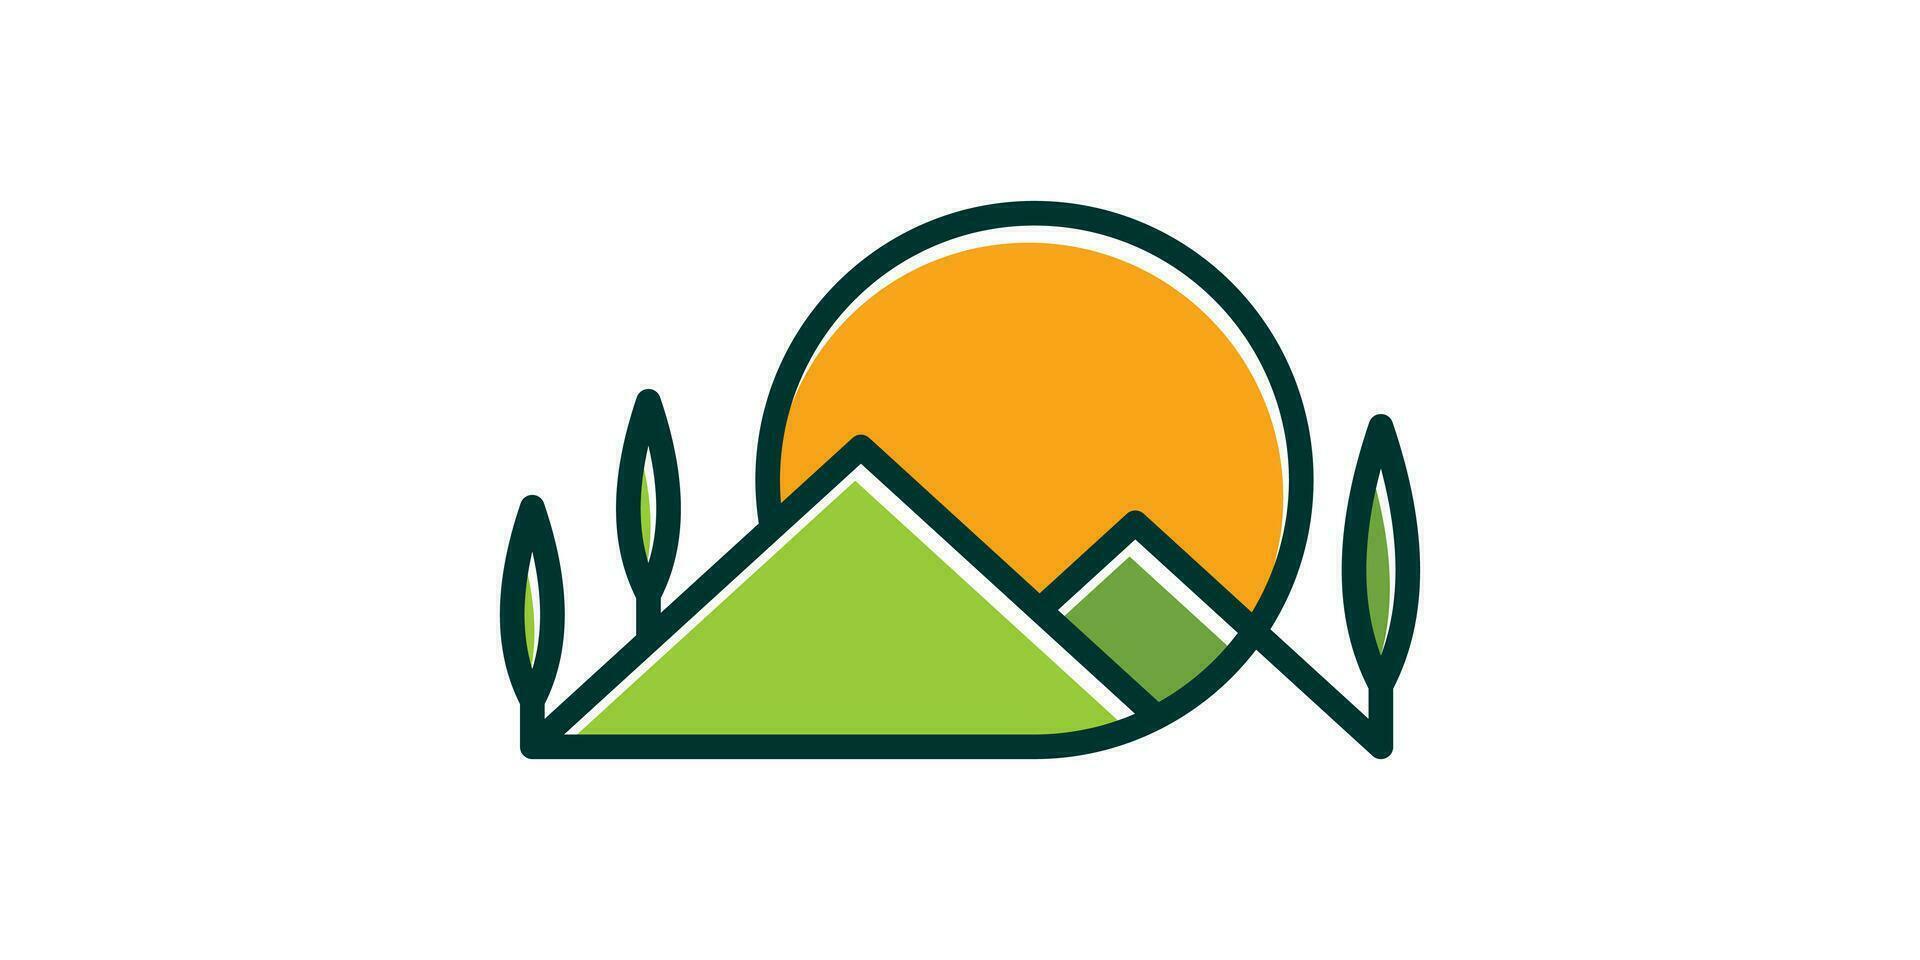 landscape logo design with mountain elements made with minimalist lines. vector